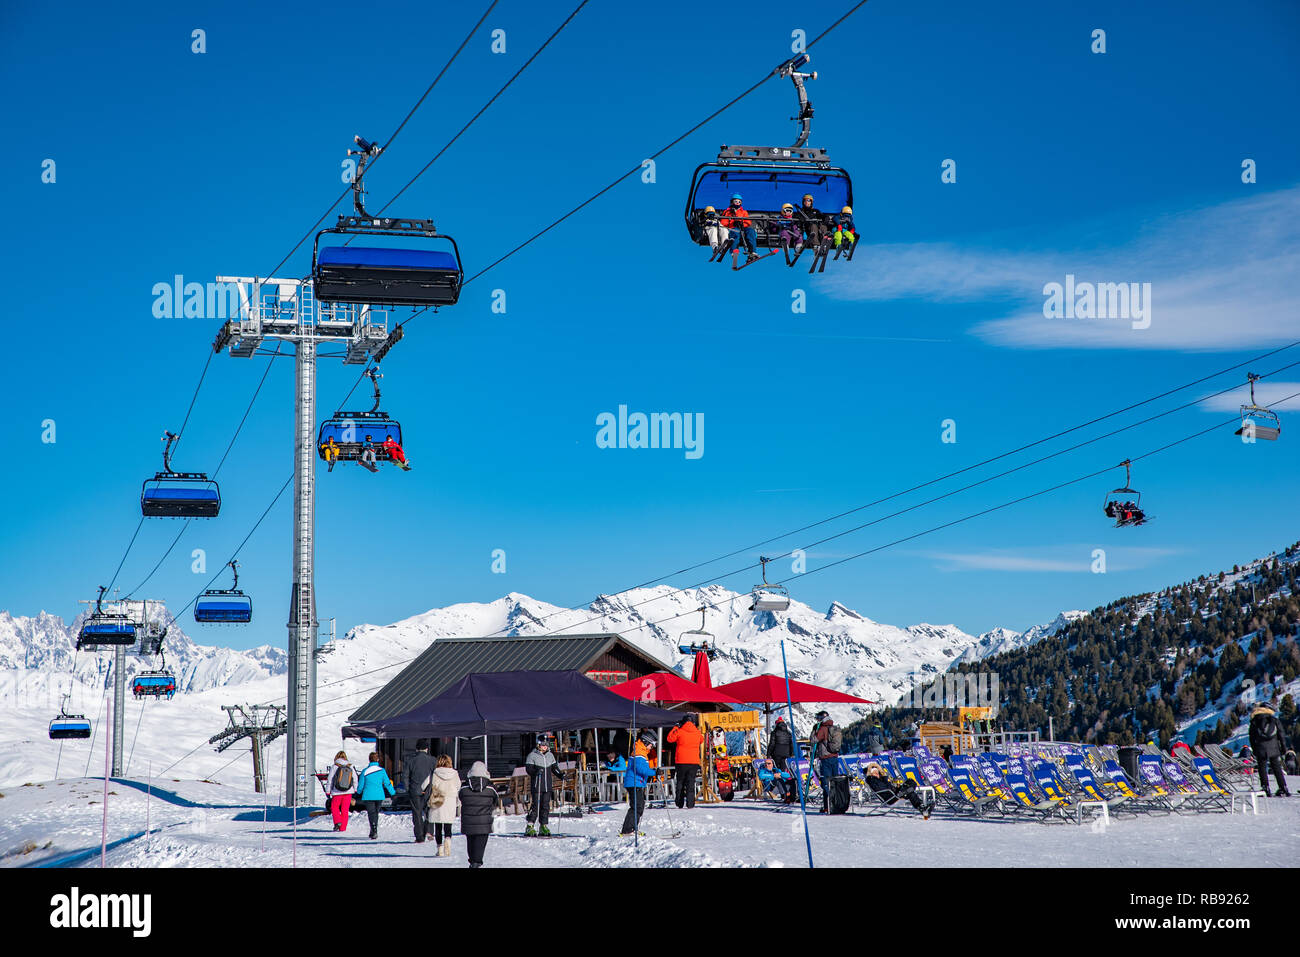 Ski lifts for ski and snowboard players for winter holiday in Alps area, Les Arcs 2000, Savoie, France, Europe Stock Photo